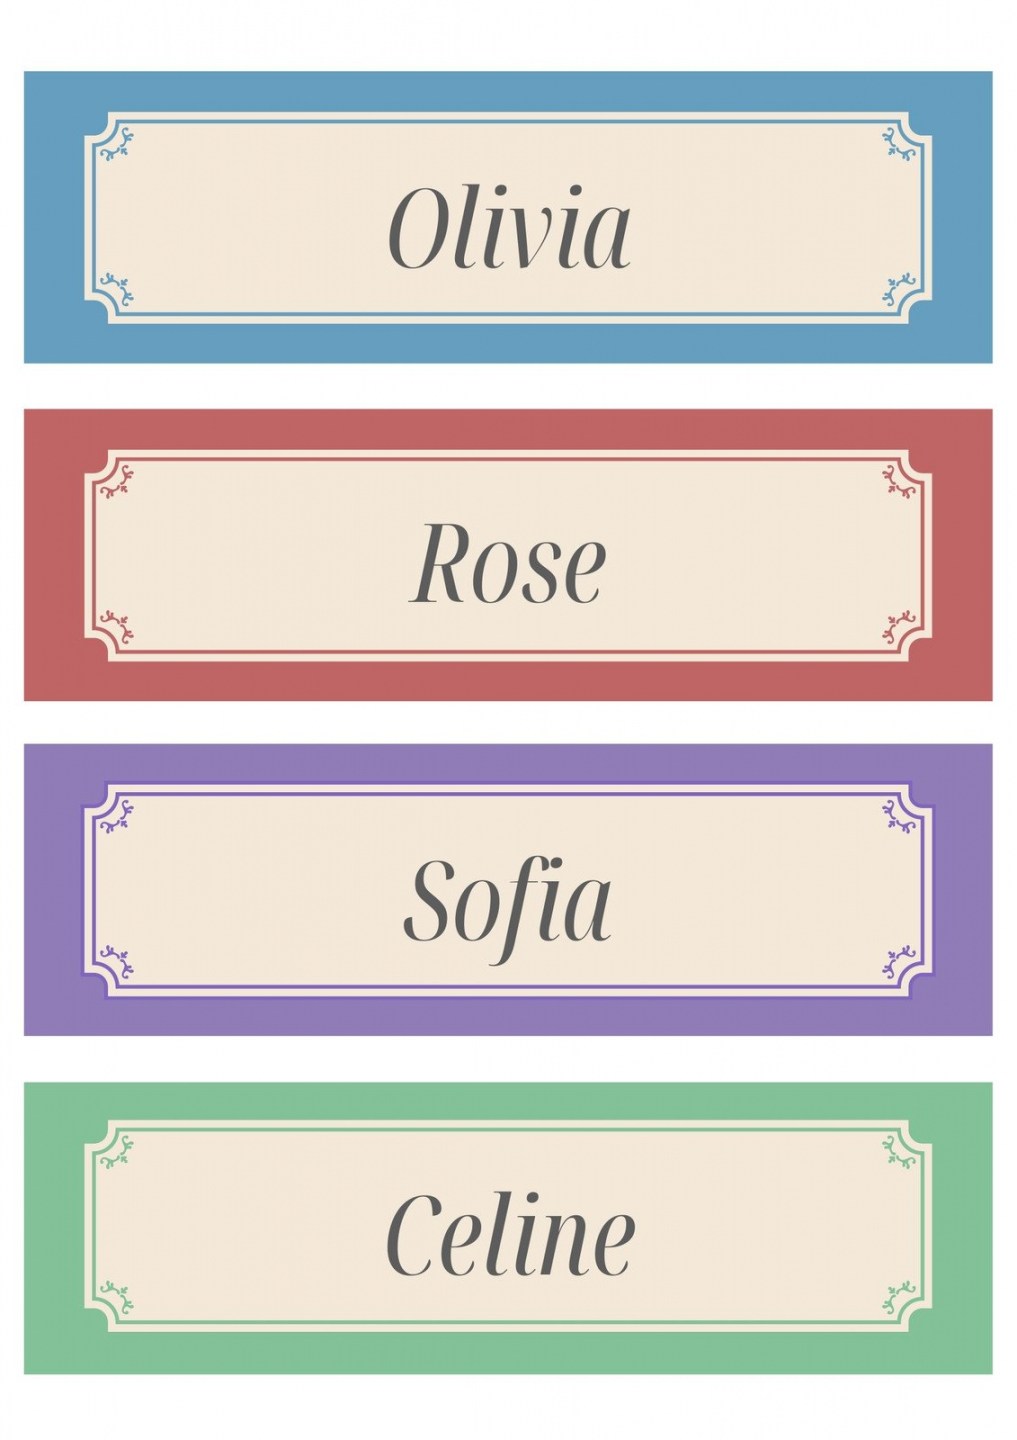 Customize + Folder Labels Templates Online - Canva - FREE Printables - Free Printable File Folder Labels Template Word